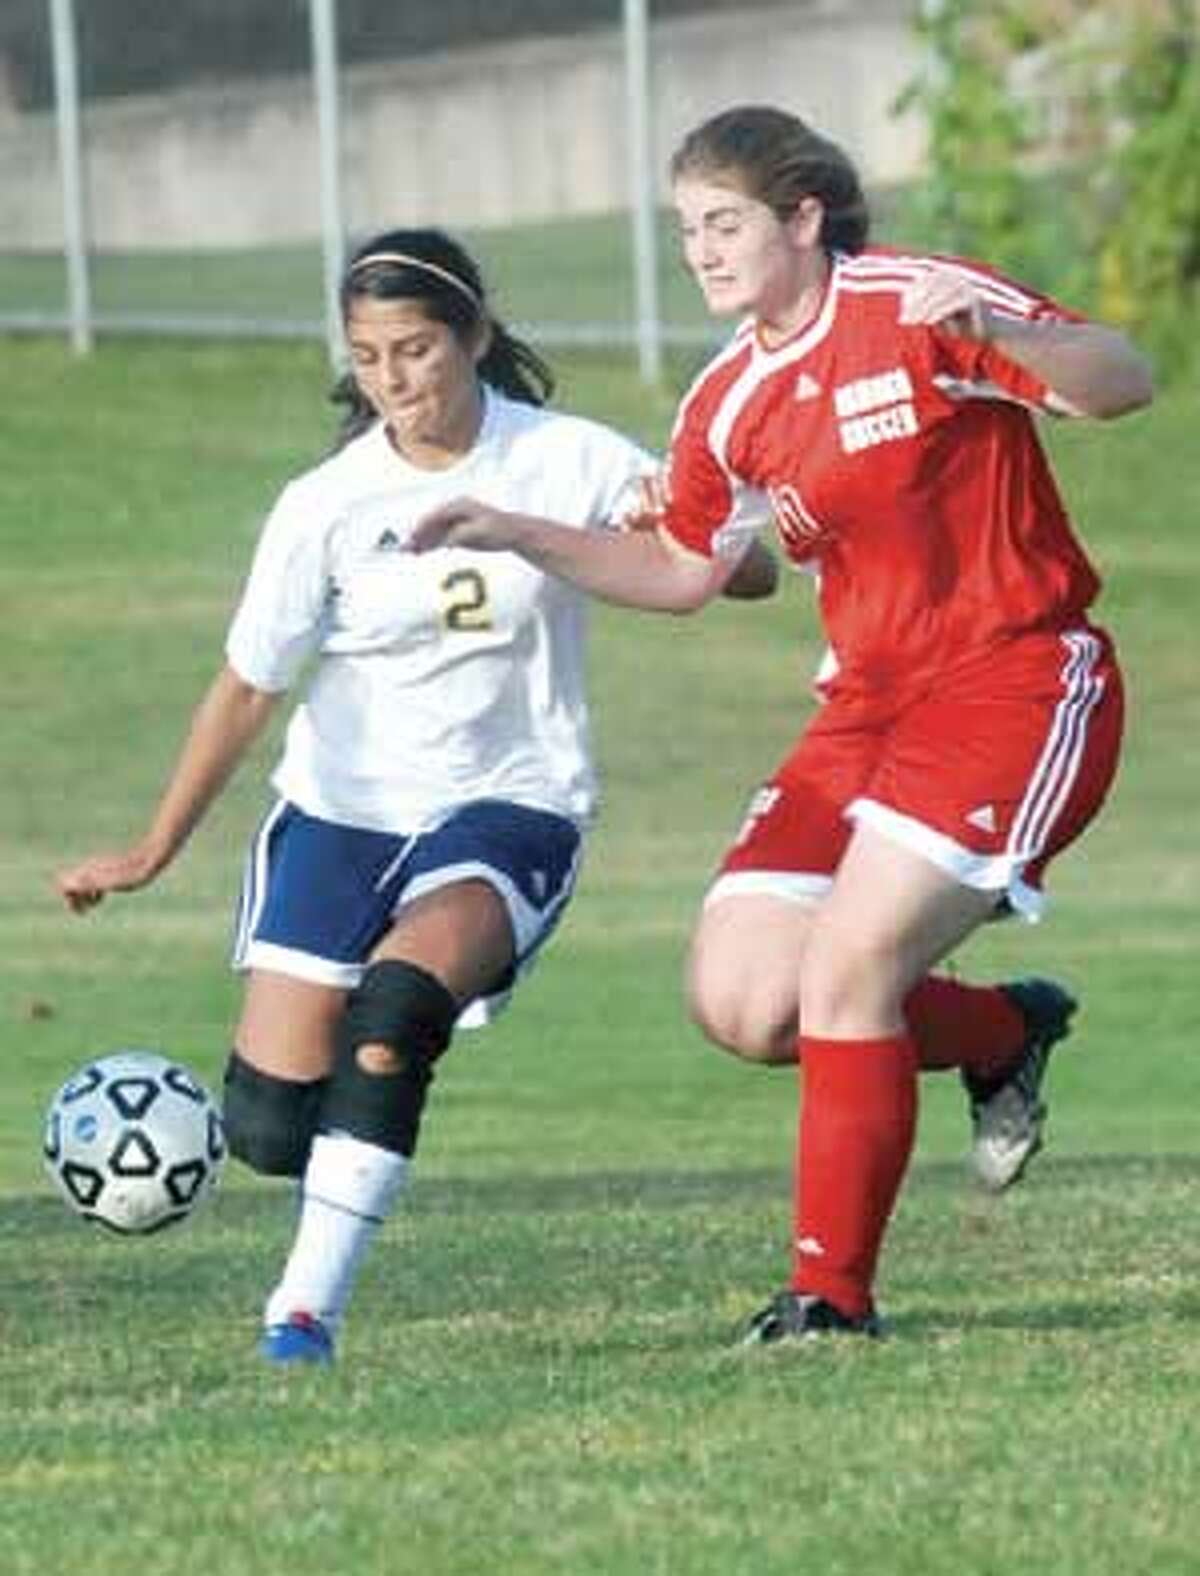 Wolcott Tech's Julia Lajoie, left, and Wamogo's Morgan Grambo battle for possession during Tuesday's Berkshire League game in Torrington.